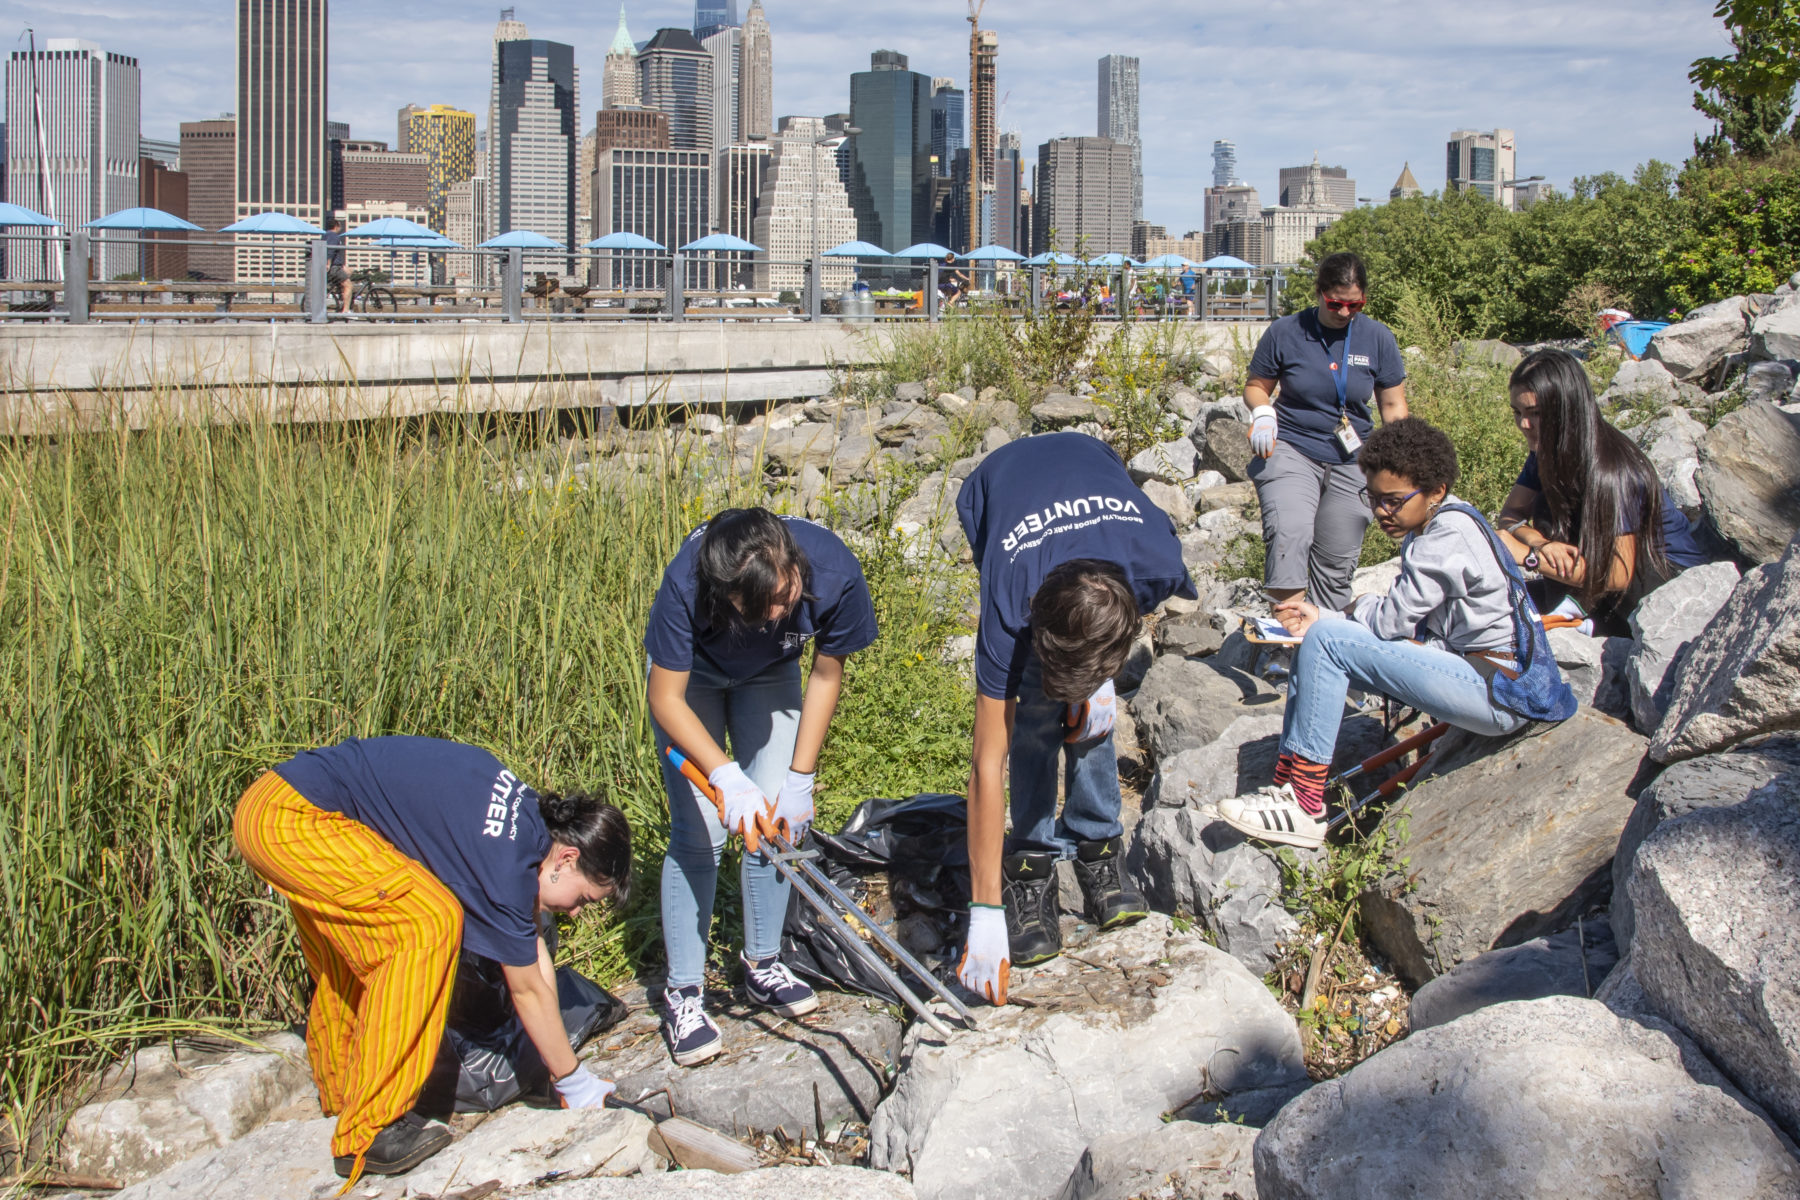 Teenagers cleaning trash from rocks in a park against the New York City skyline.  